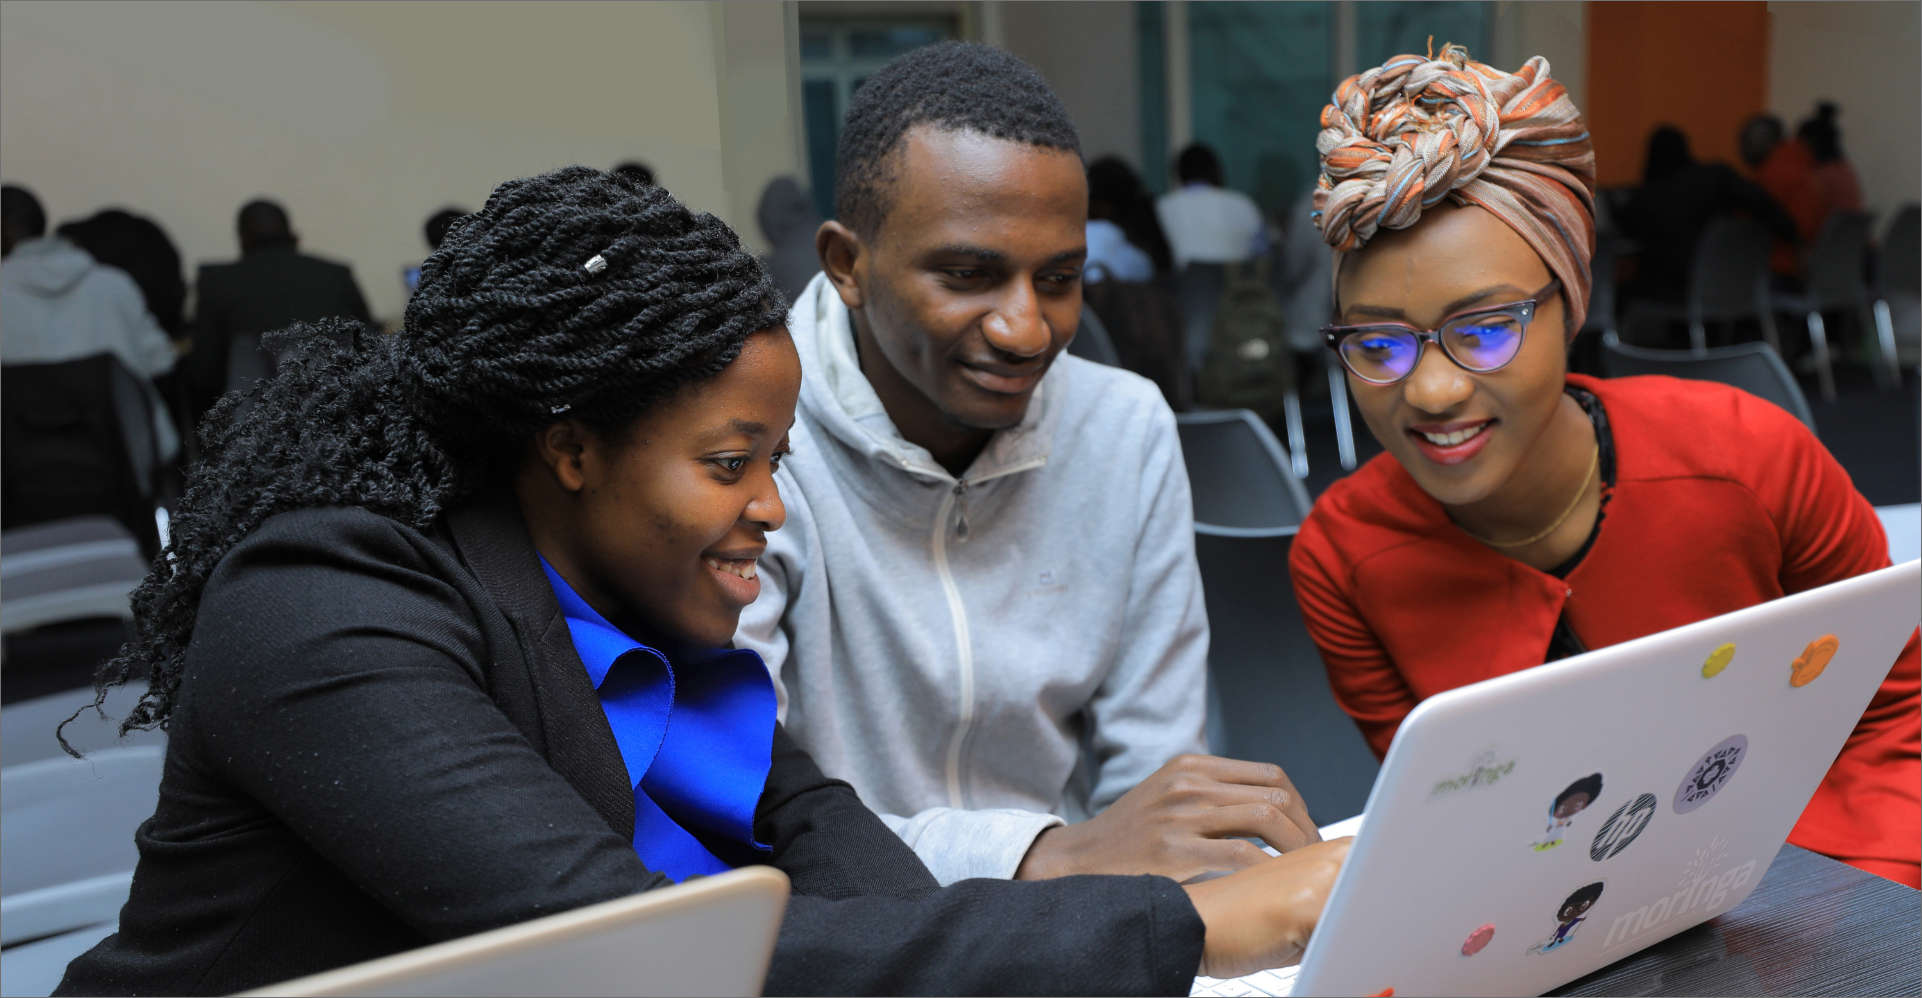 Moringa graduates over 250 Software Engineering & Data Science Students with curriculum from leading US Bootcamp